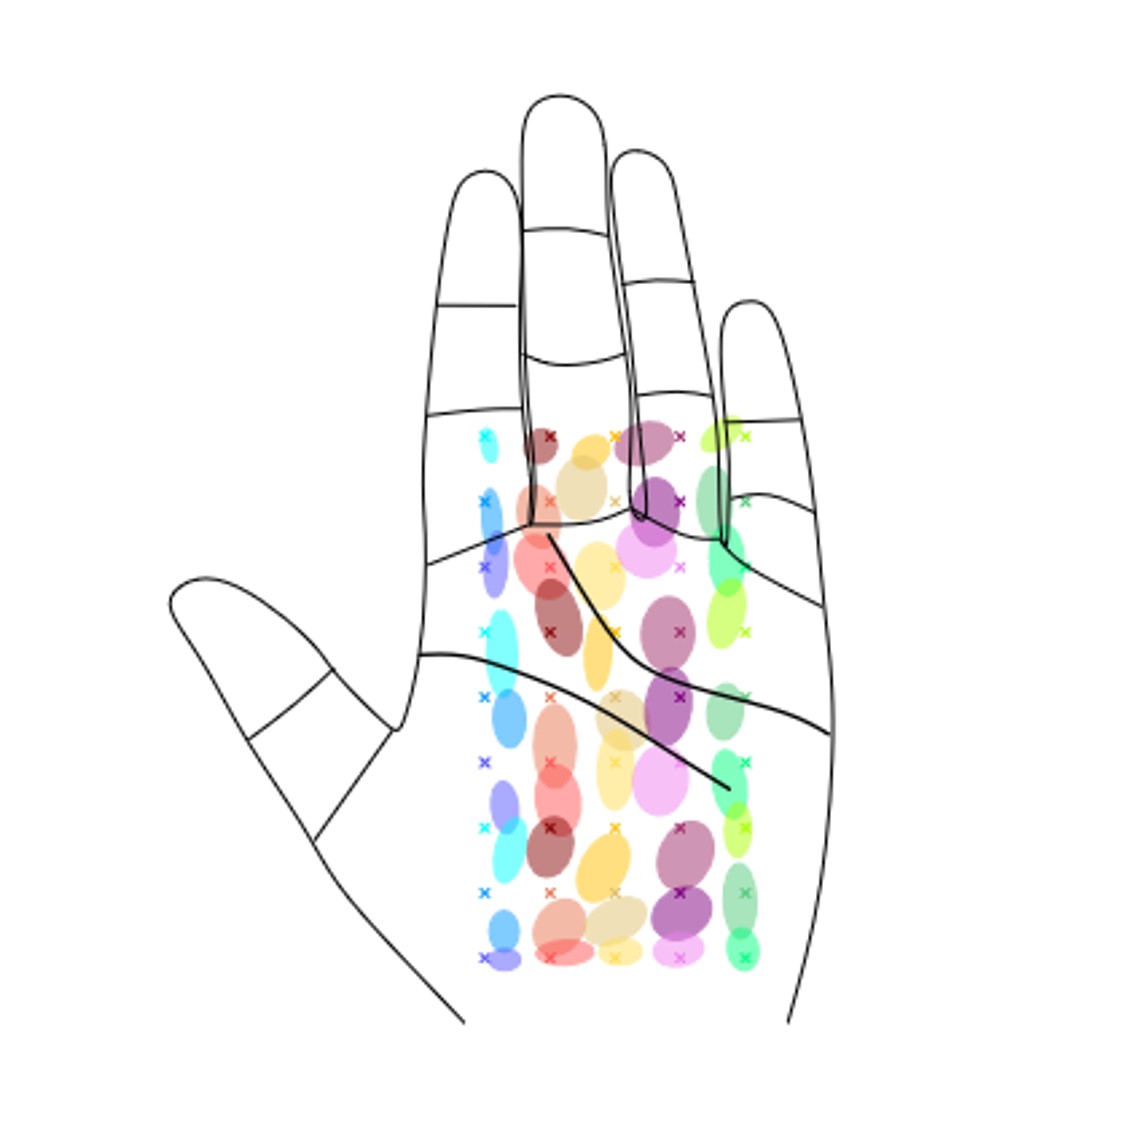 Thumbnail for Understanding Stationary and Moving Direct Skin Vibrotactile Stimulation on the Palm